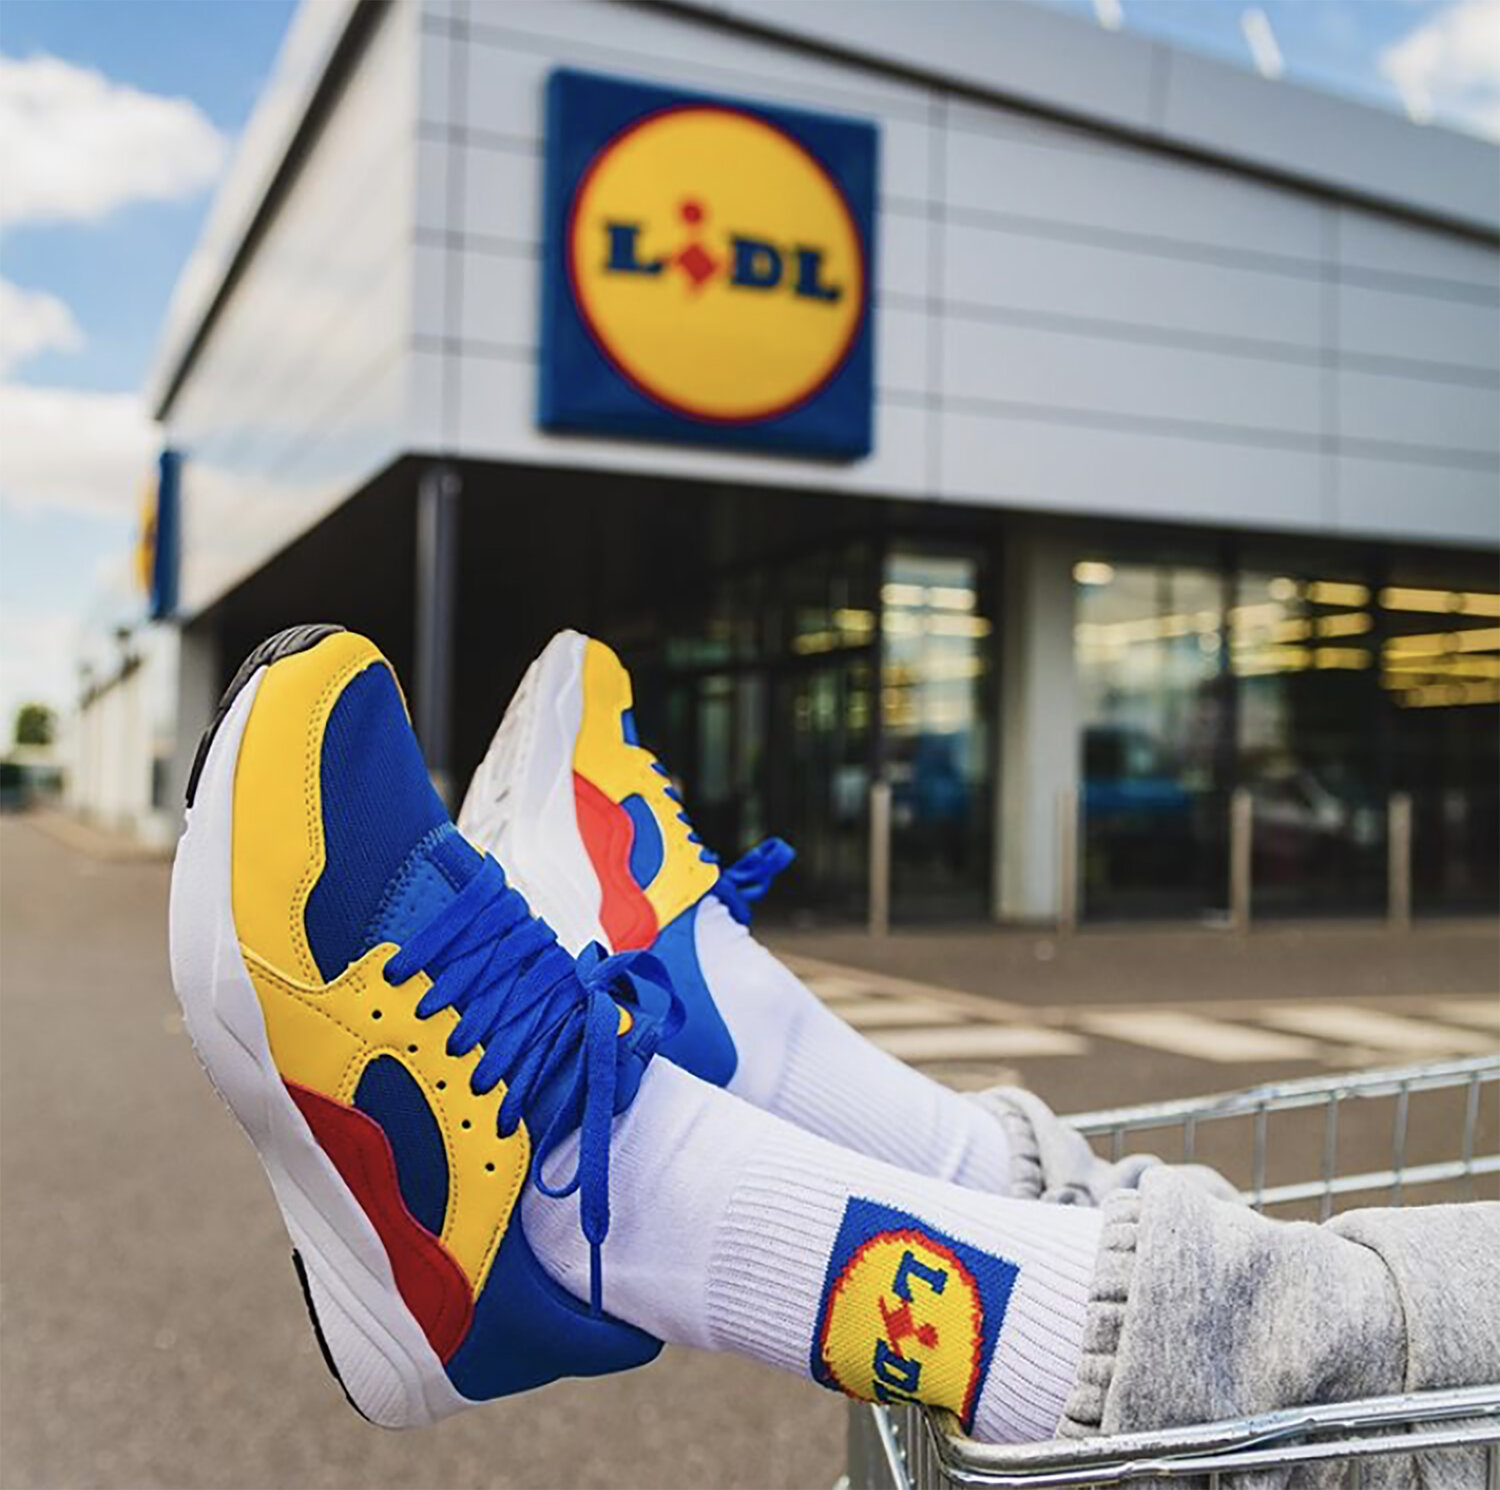 Lidl sneakers sell out reaching record price - Wanted in Europe